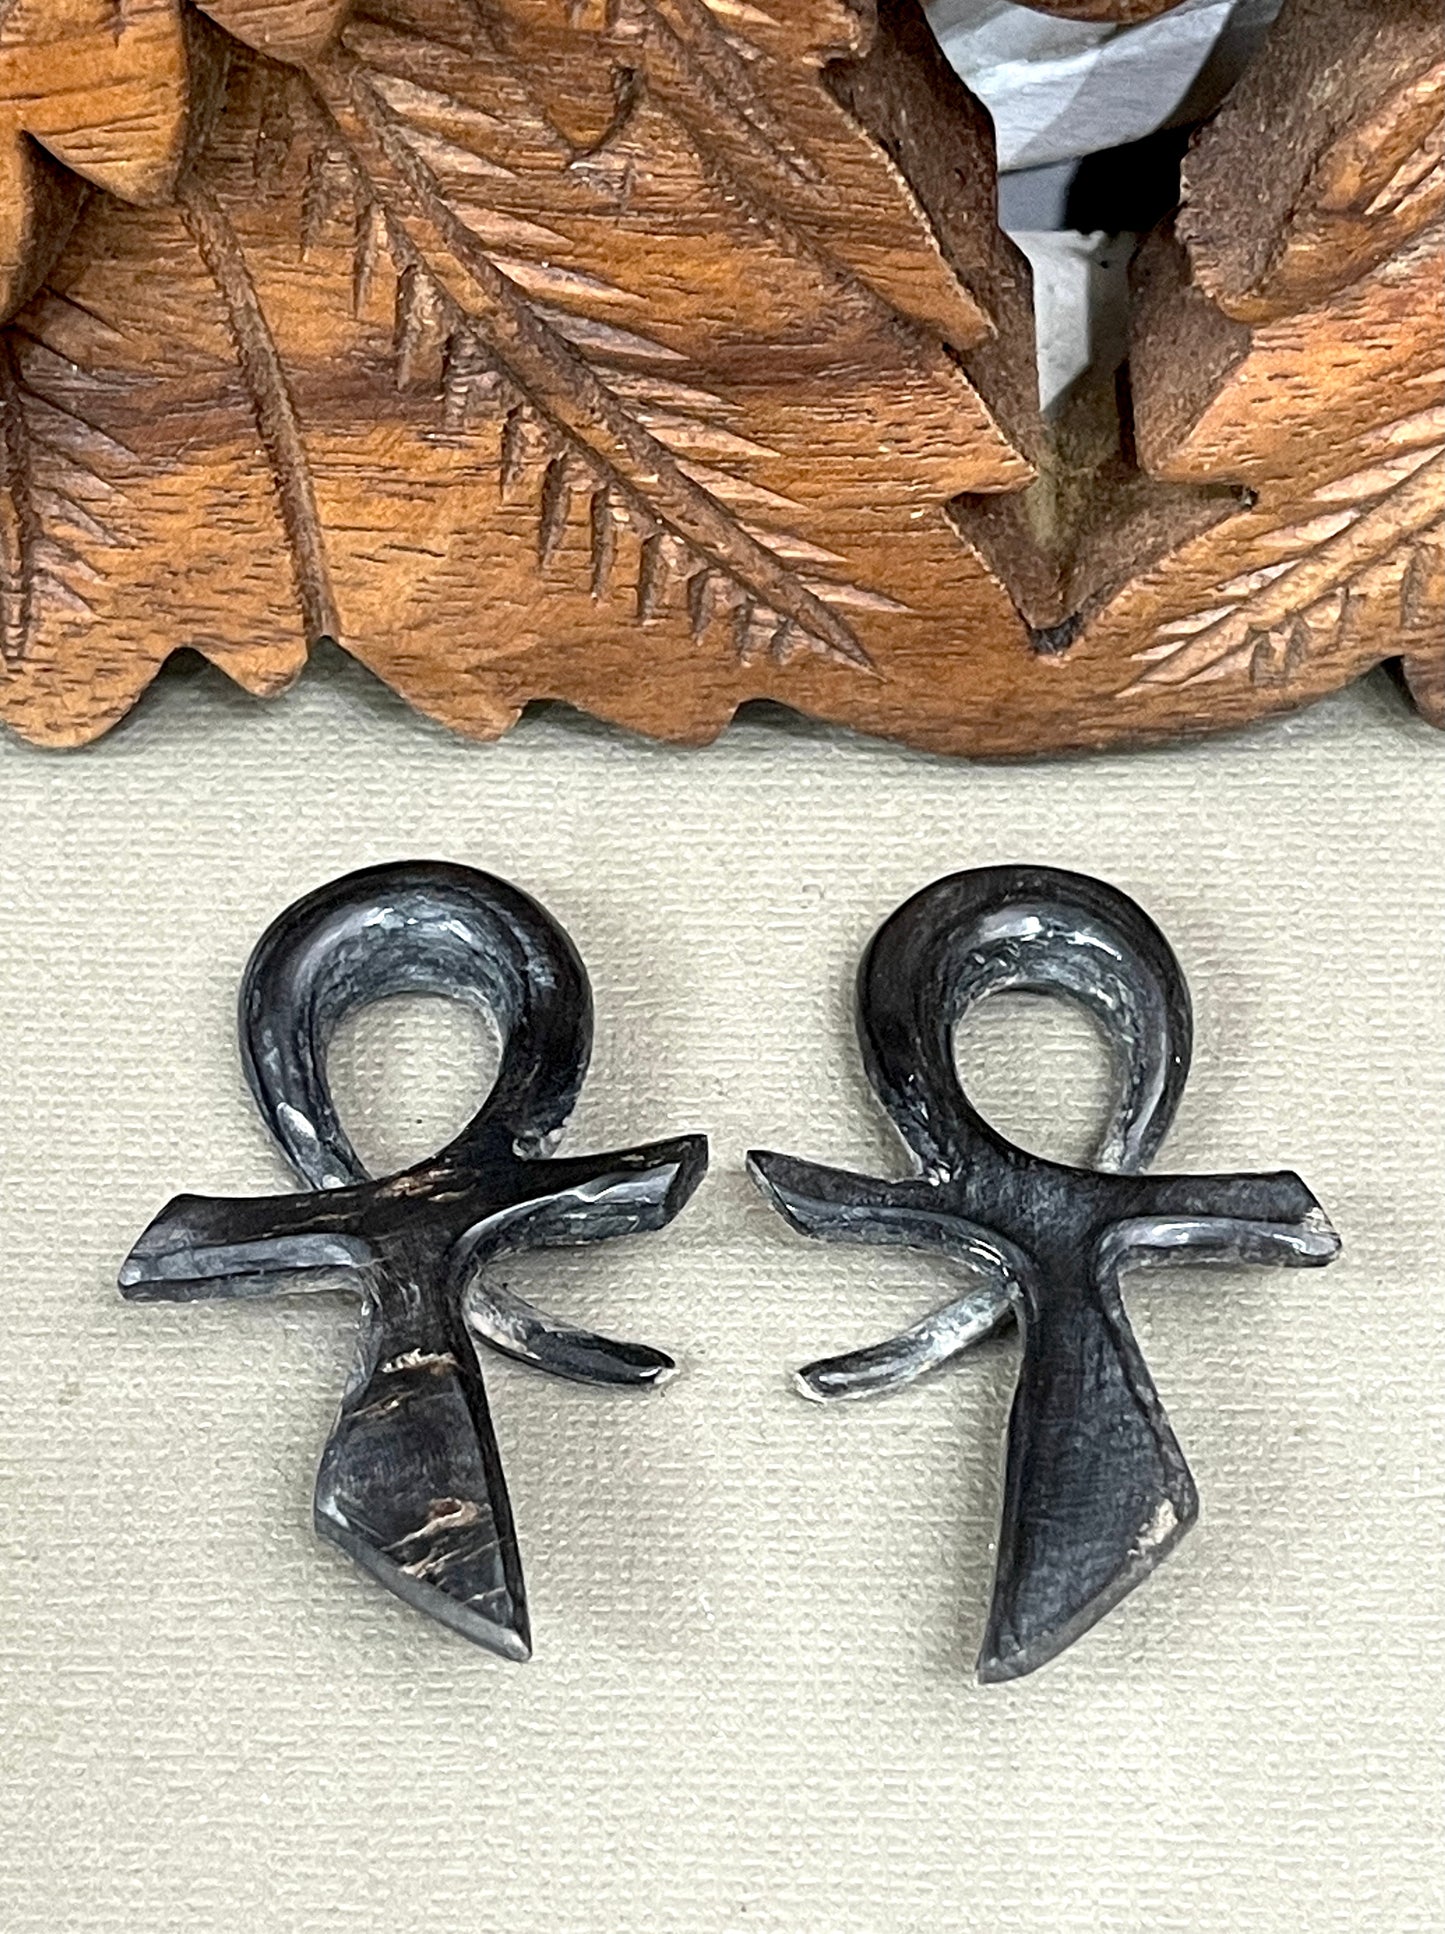 Ankh Gauged Earrings - Available in 6g-0g